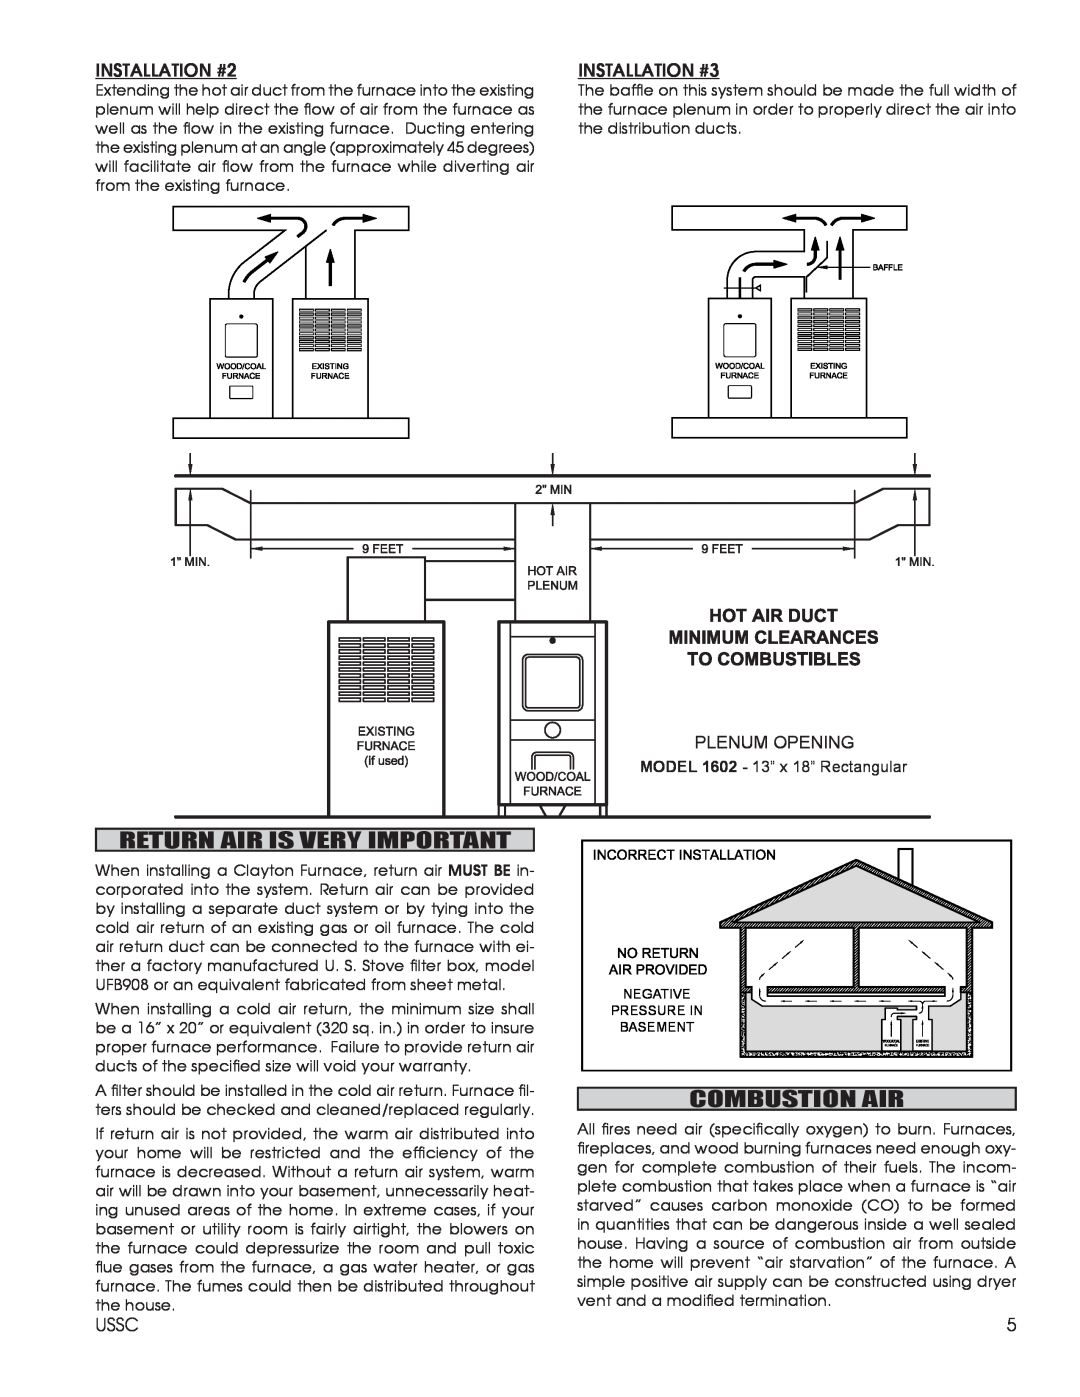 United States Stove 1602M Return Air Is Very Important, Combustion Air, INSTALLATION #2, INSTALLATION #3 